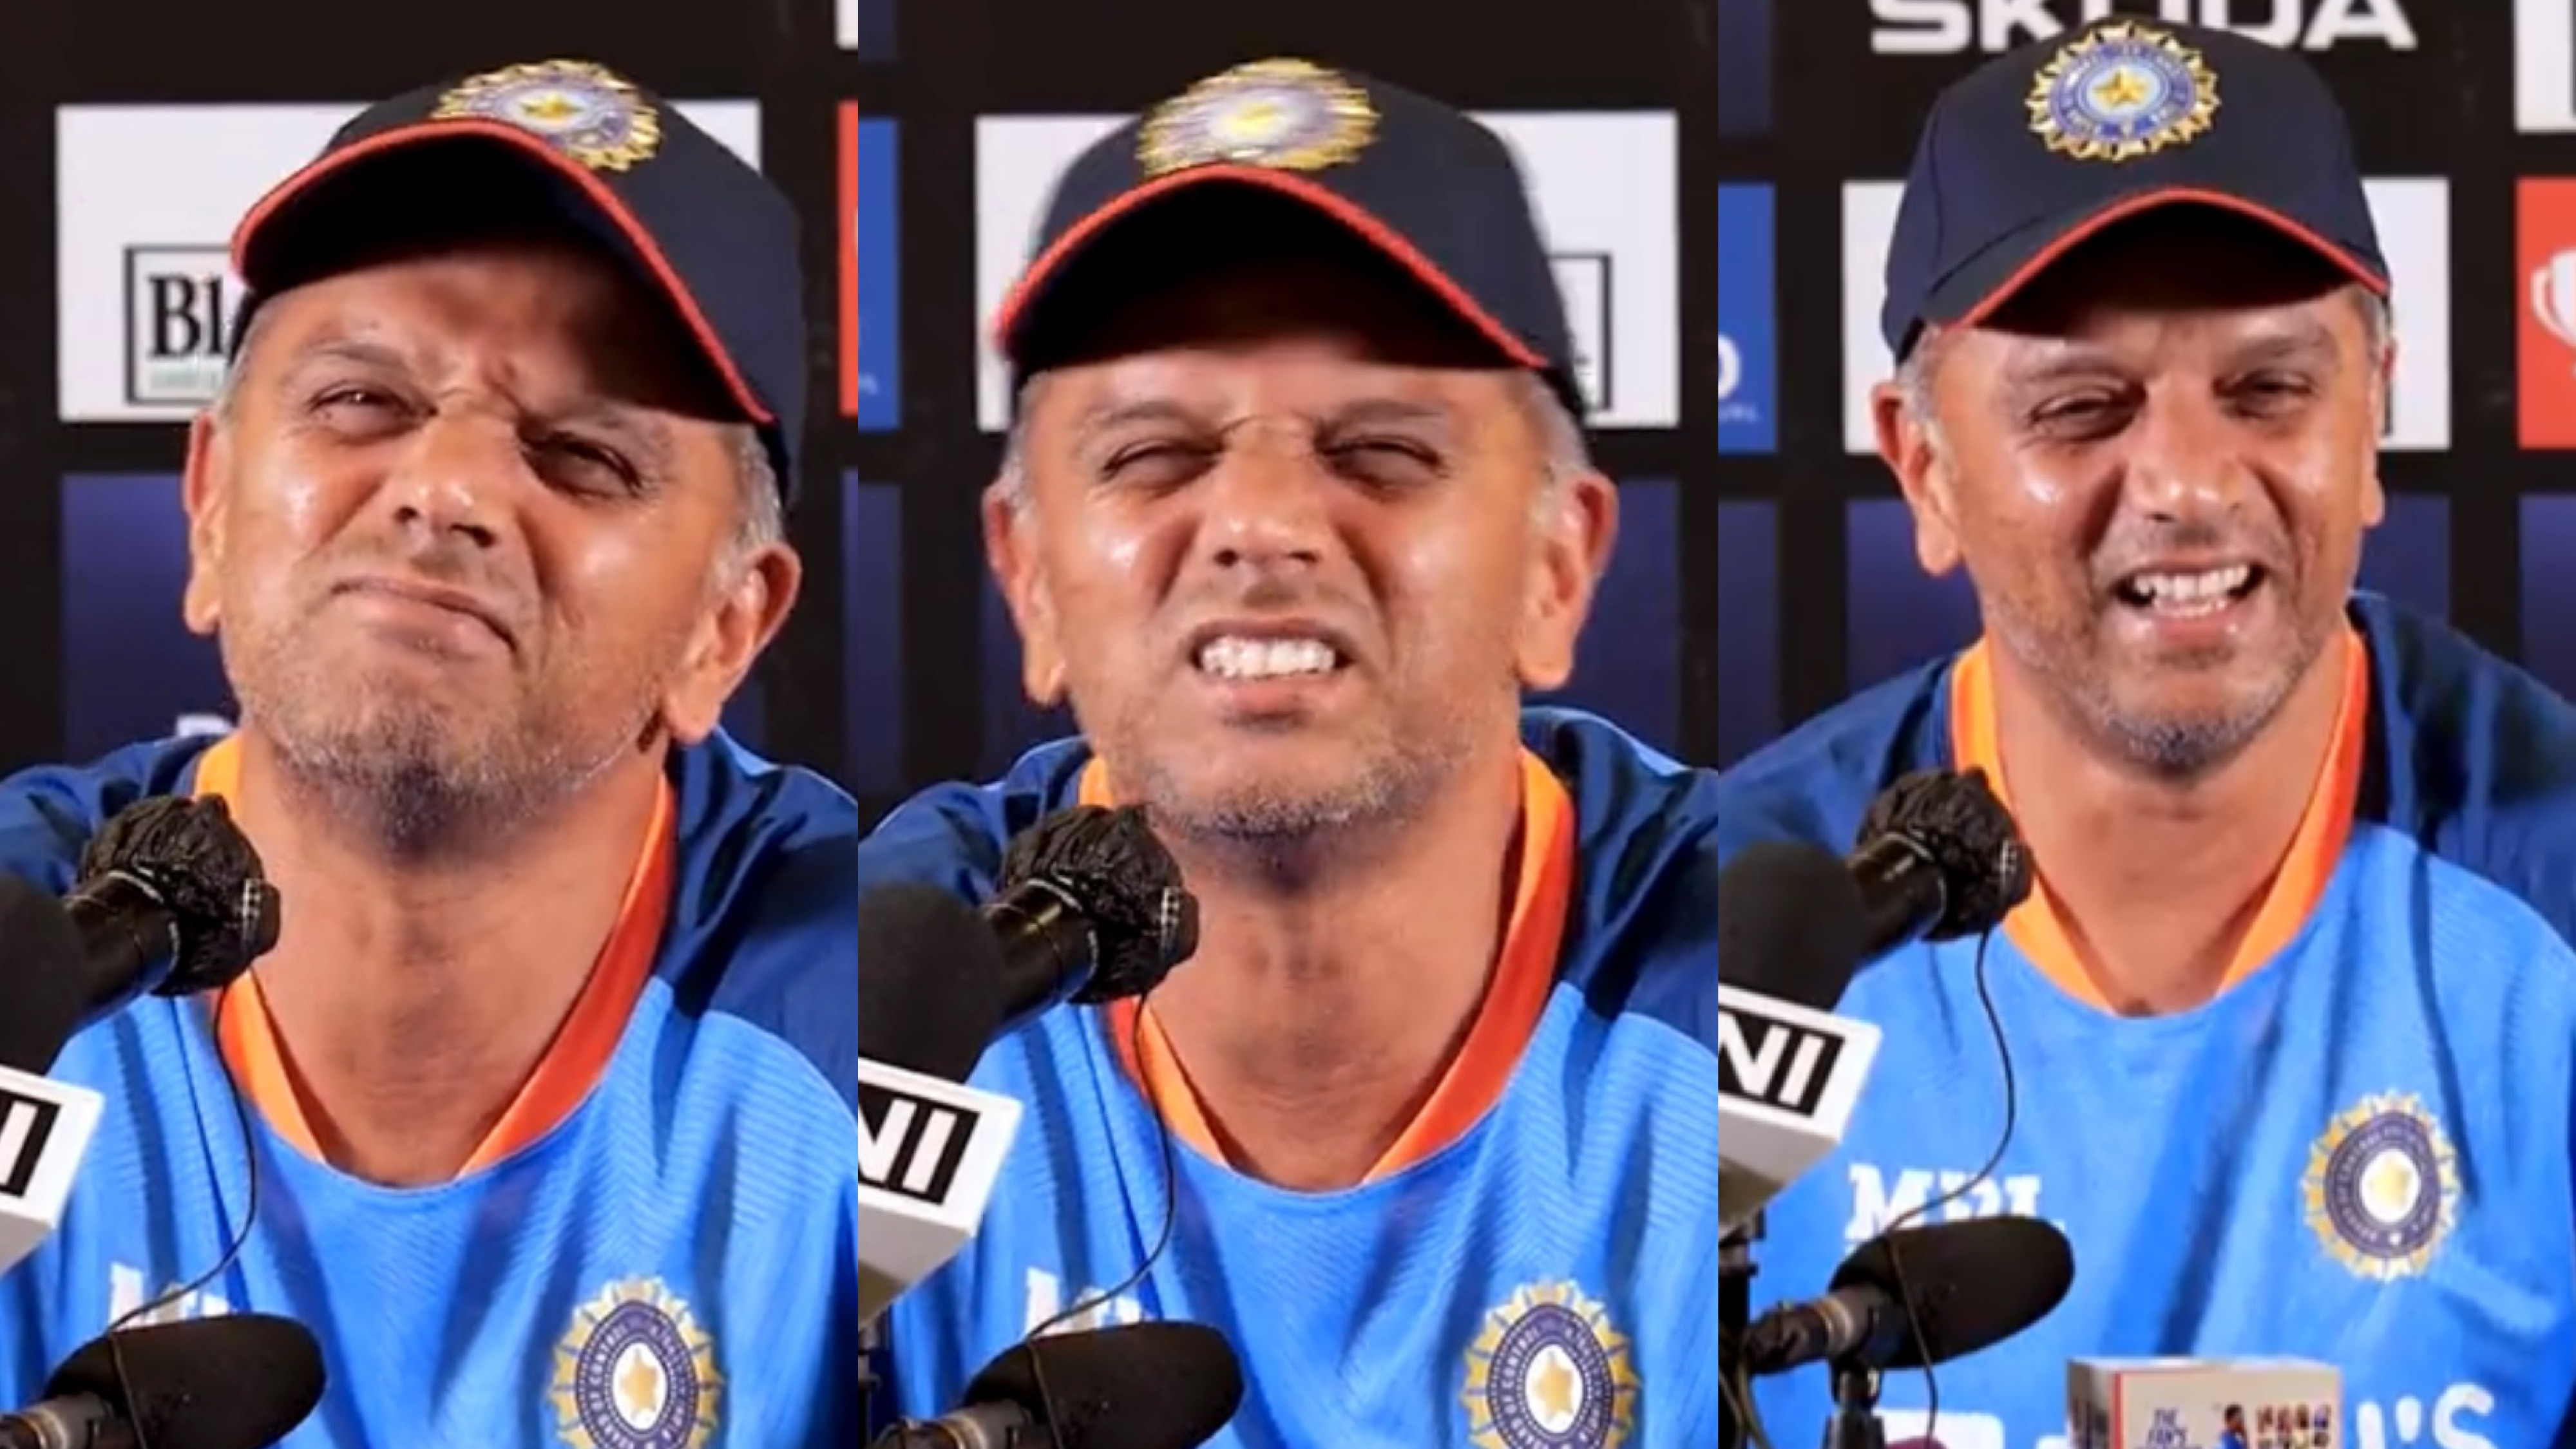 Asia Cup 2022: WATCH - Rahul Dravid hilariously shies away from using 's*xy' to describe Pakistan's pacers